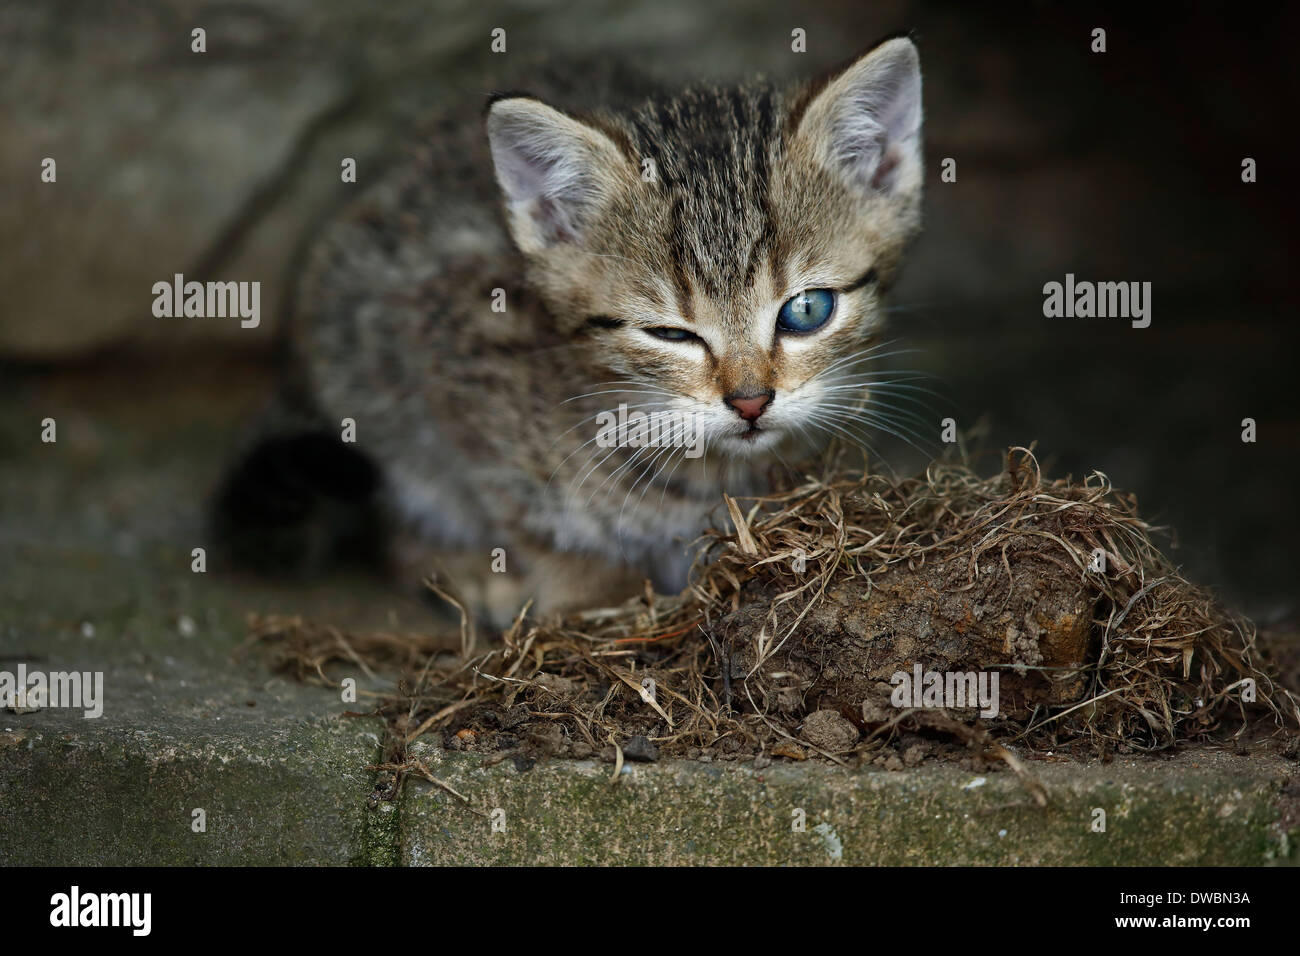 Tabby kitten (felis silvestris catus) with one eye open and one closed Stock Photo